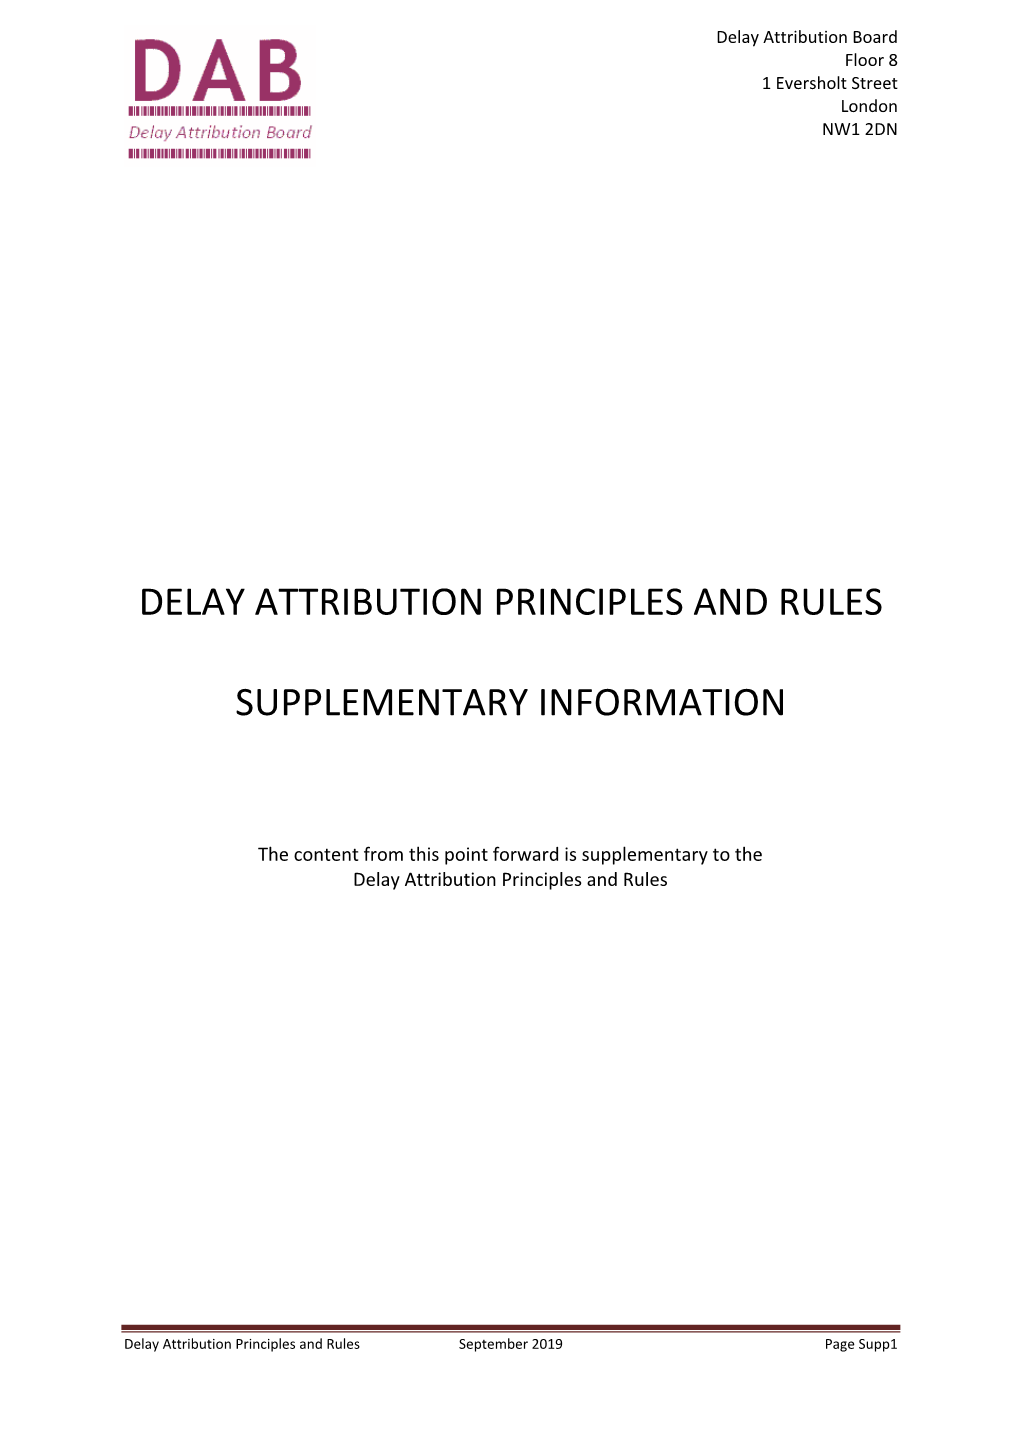 Delay Attribution Principles and Rules